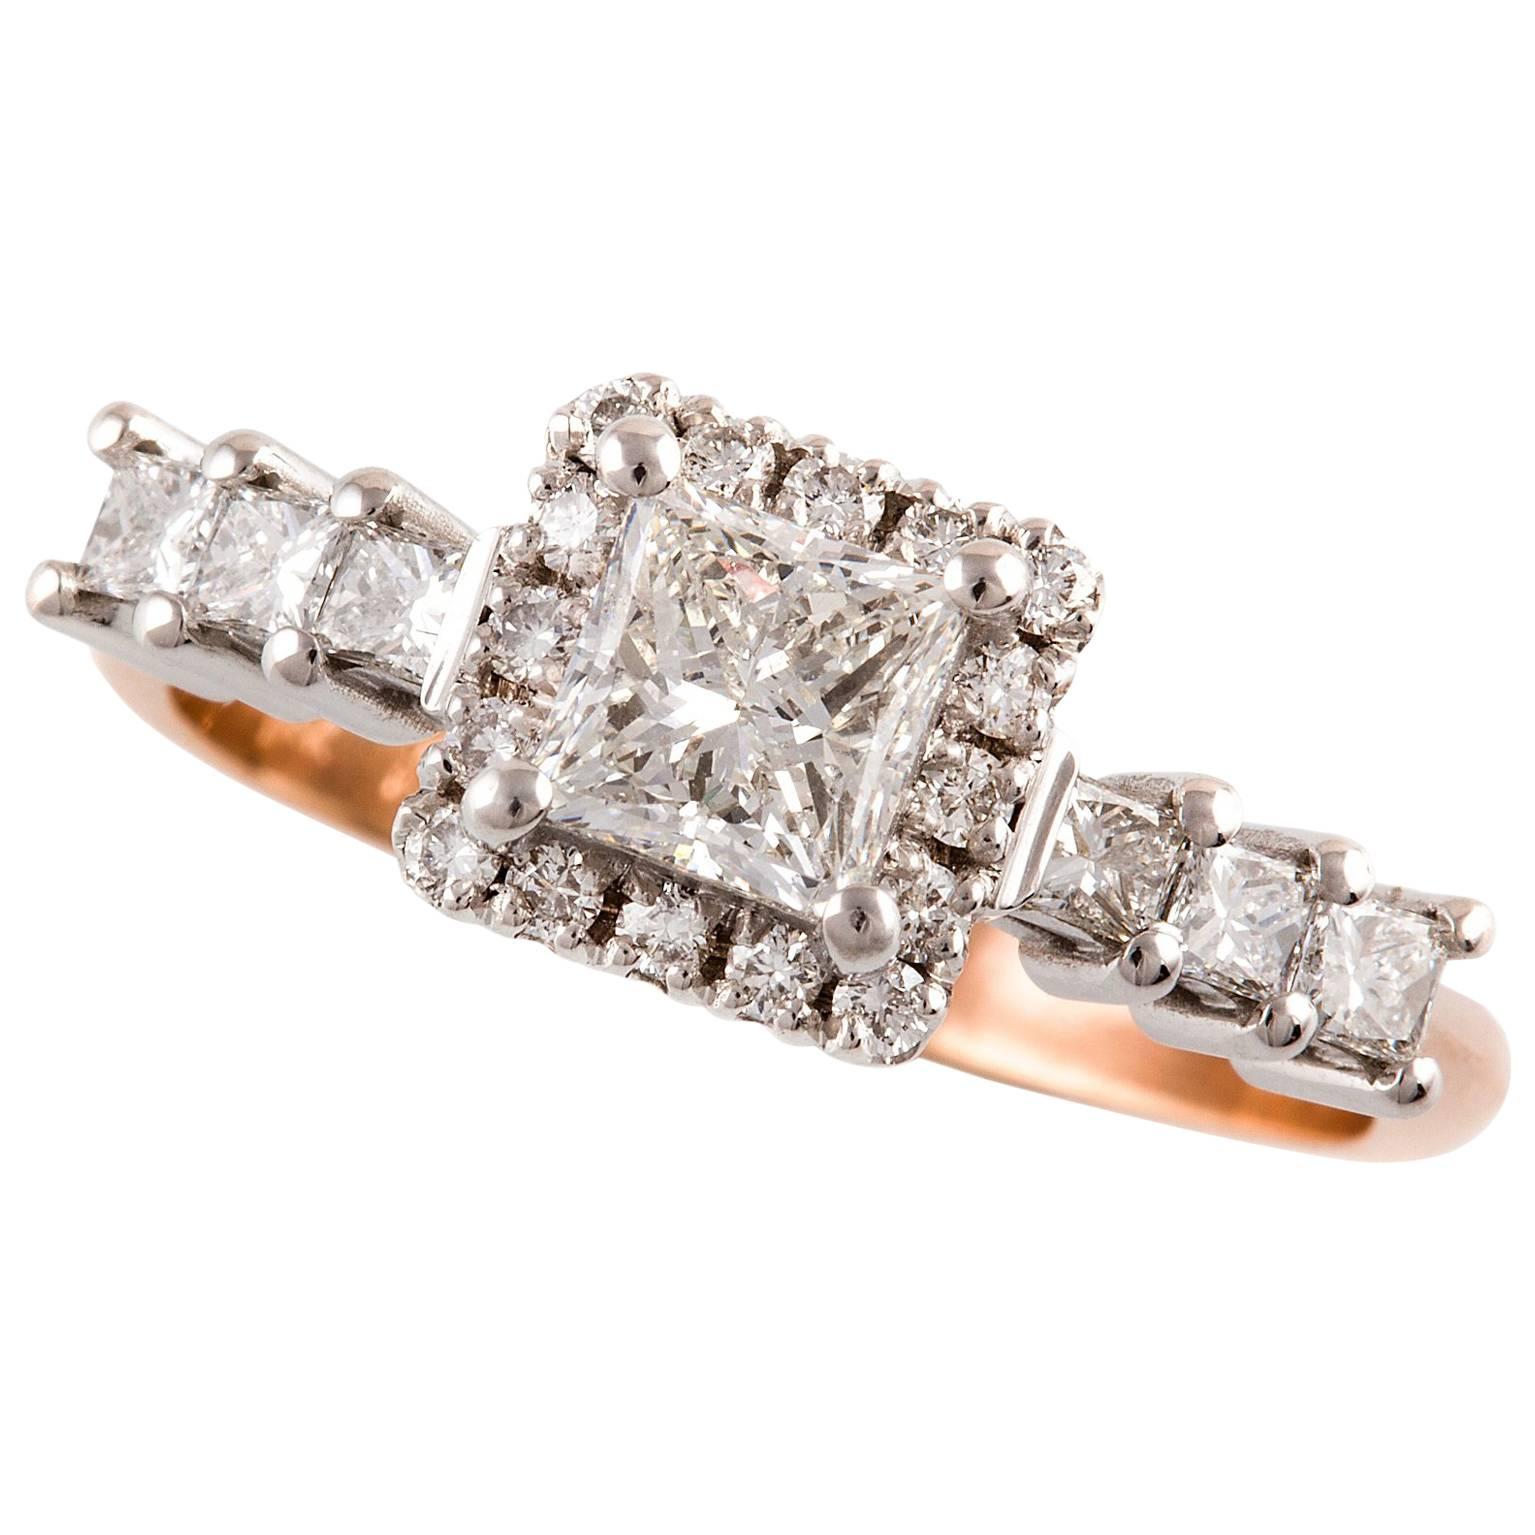 Piazza Diamond Ring

This gorgeous vintage style ring with 18ct white gold setting and rose gold band is set with a combination of princess and round brilliant cut diamonds.

Princess cut diamond: G colour, SI clarity, 0.72ct, 4.95 x